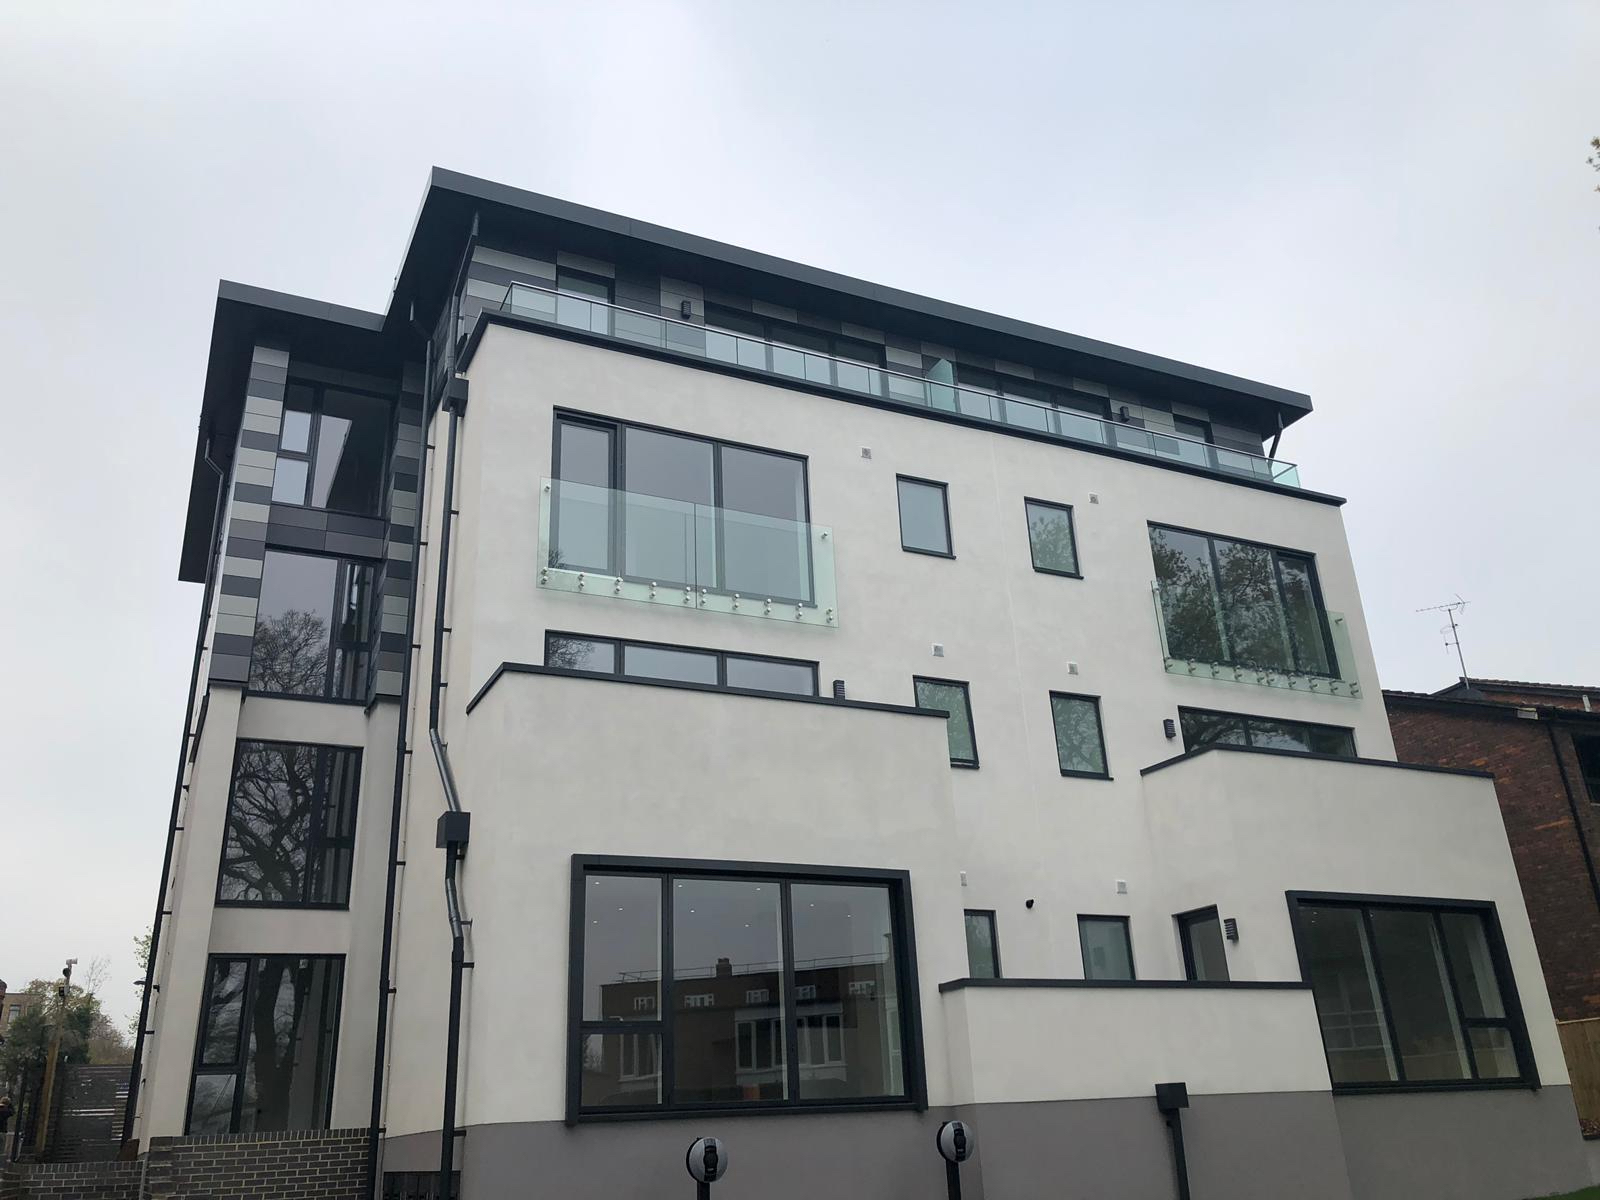 Cladding and glass balustrades at a site in Forest Hill designed, supplied and installed by Datum Group Ltd.